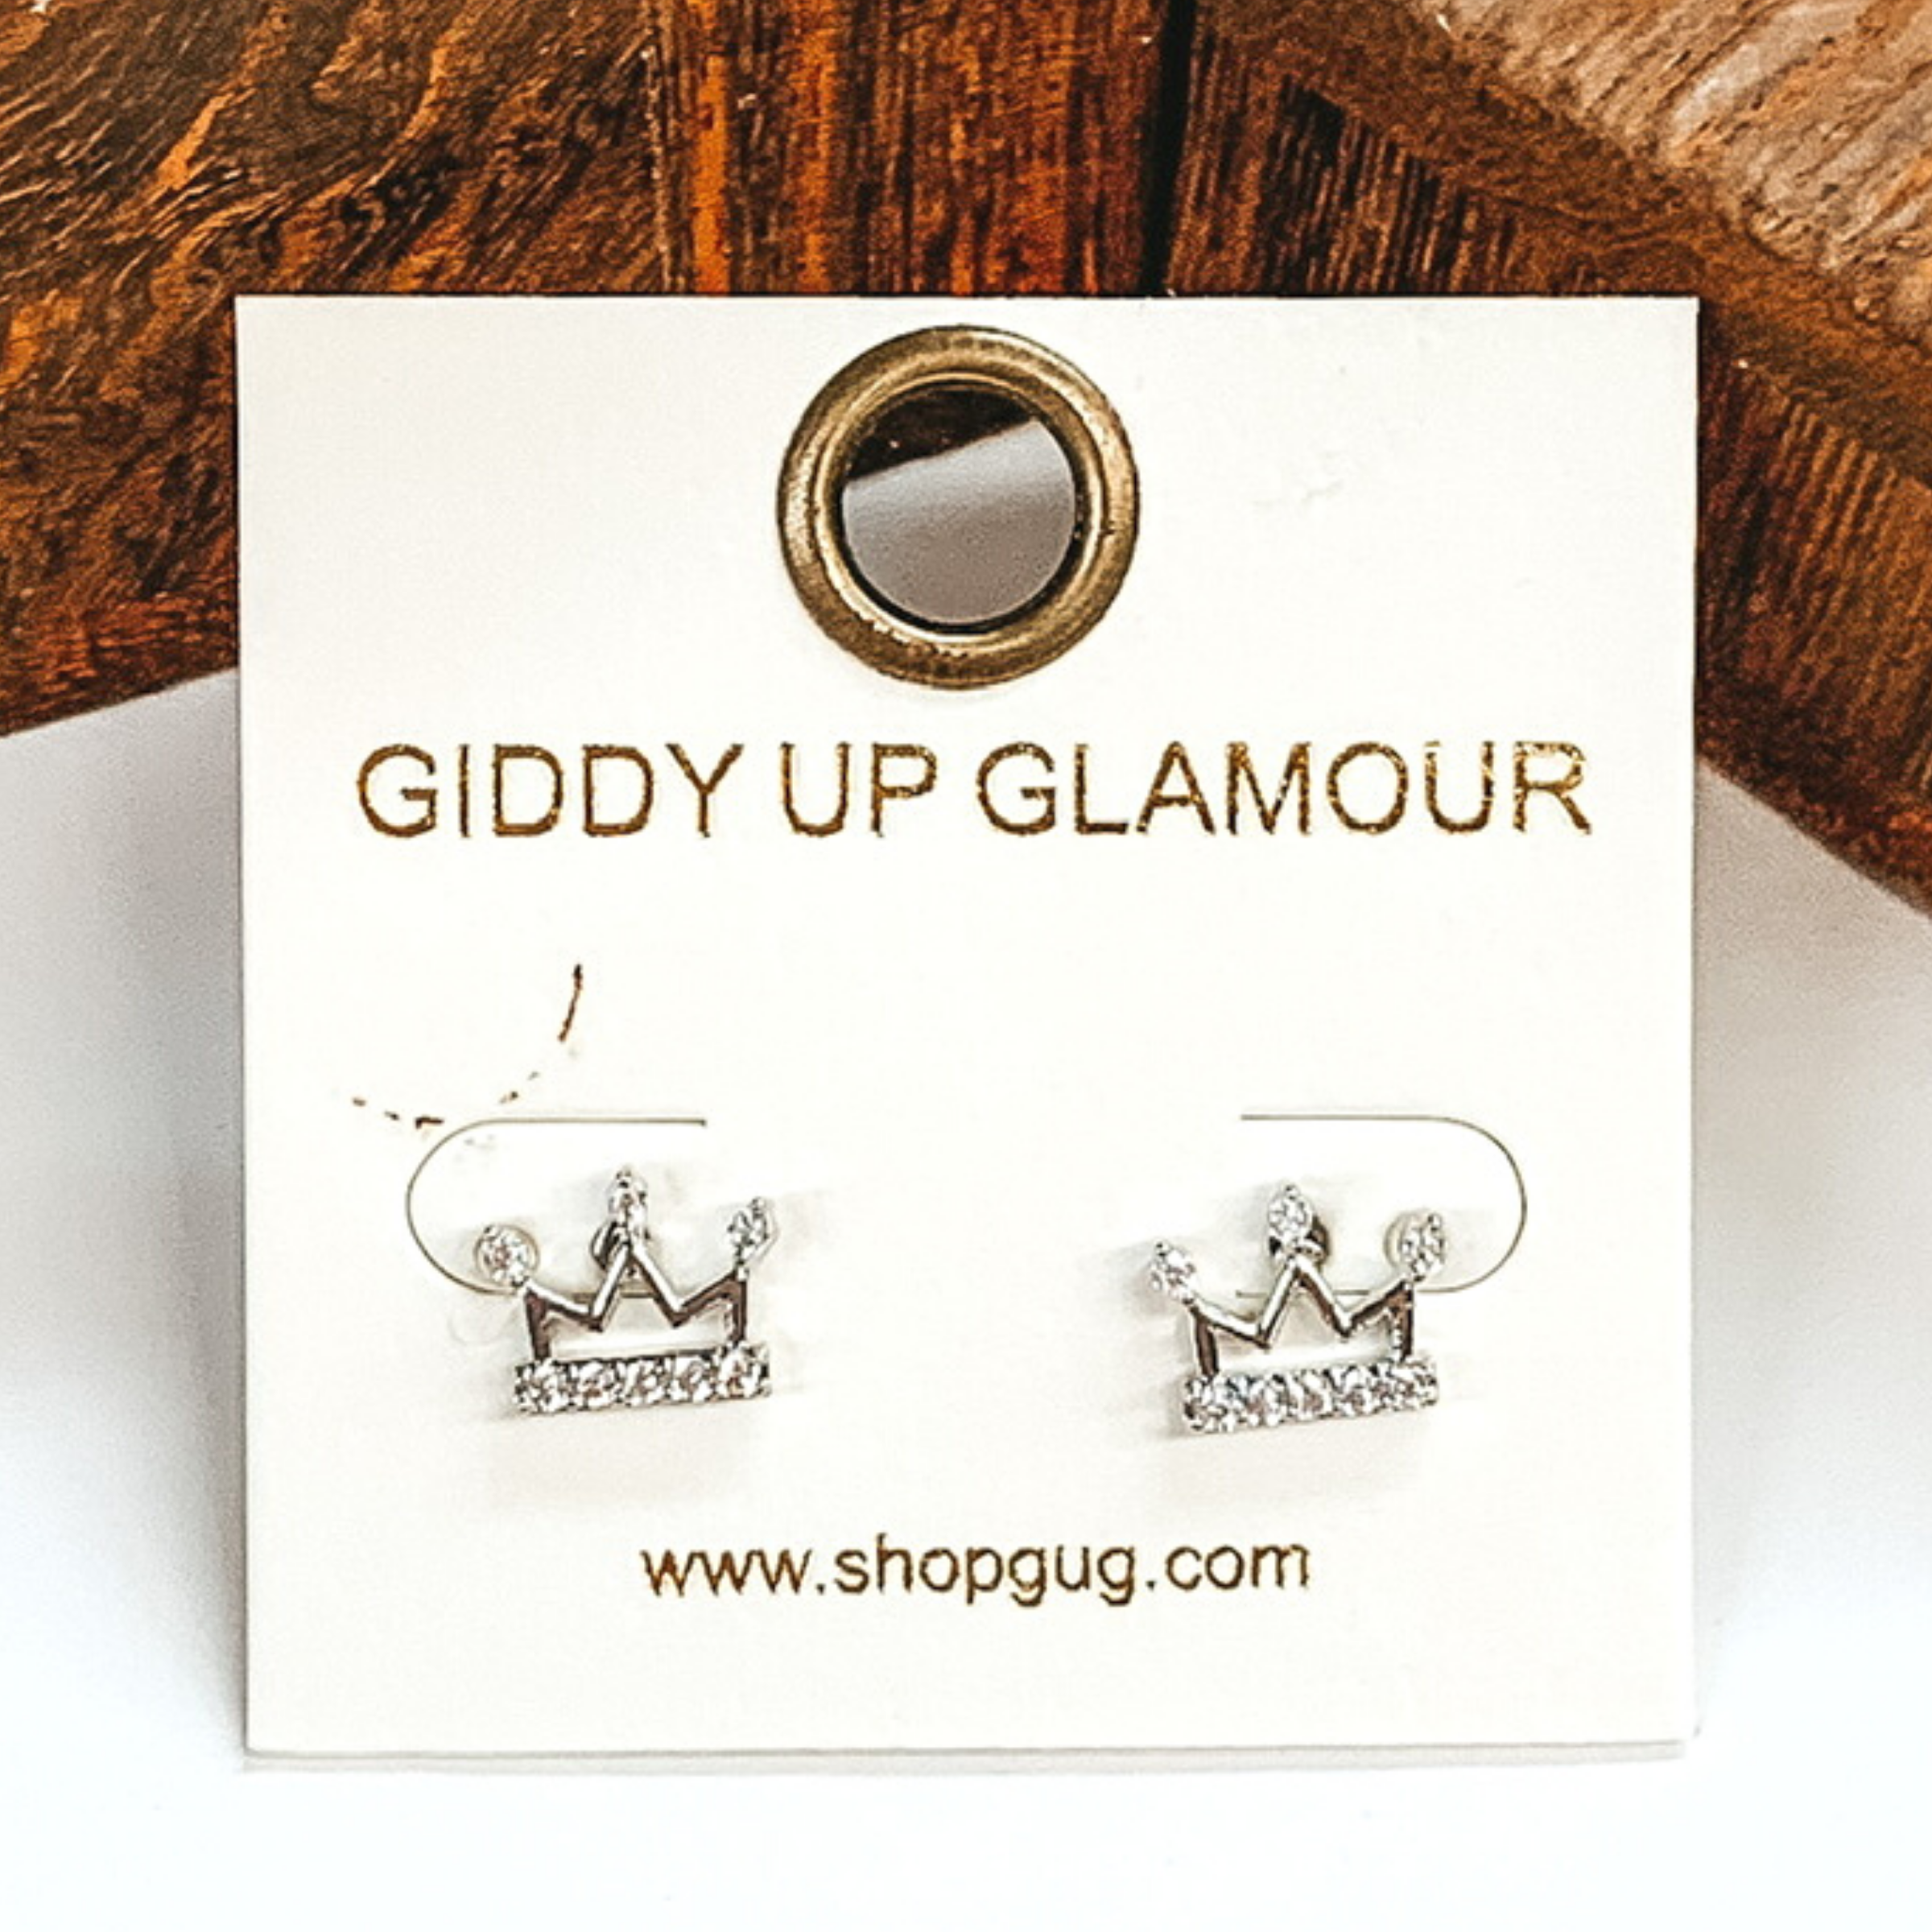 Small, silver crown outline stud earrings with clear crystals. These earrings are pictured on a white earrings card on a white and brown background.